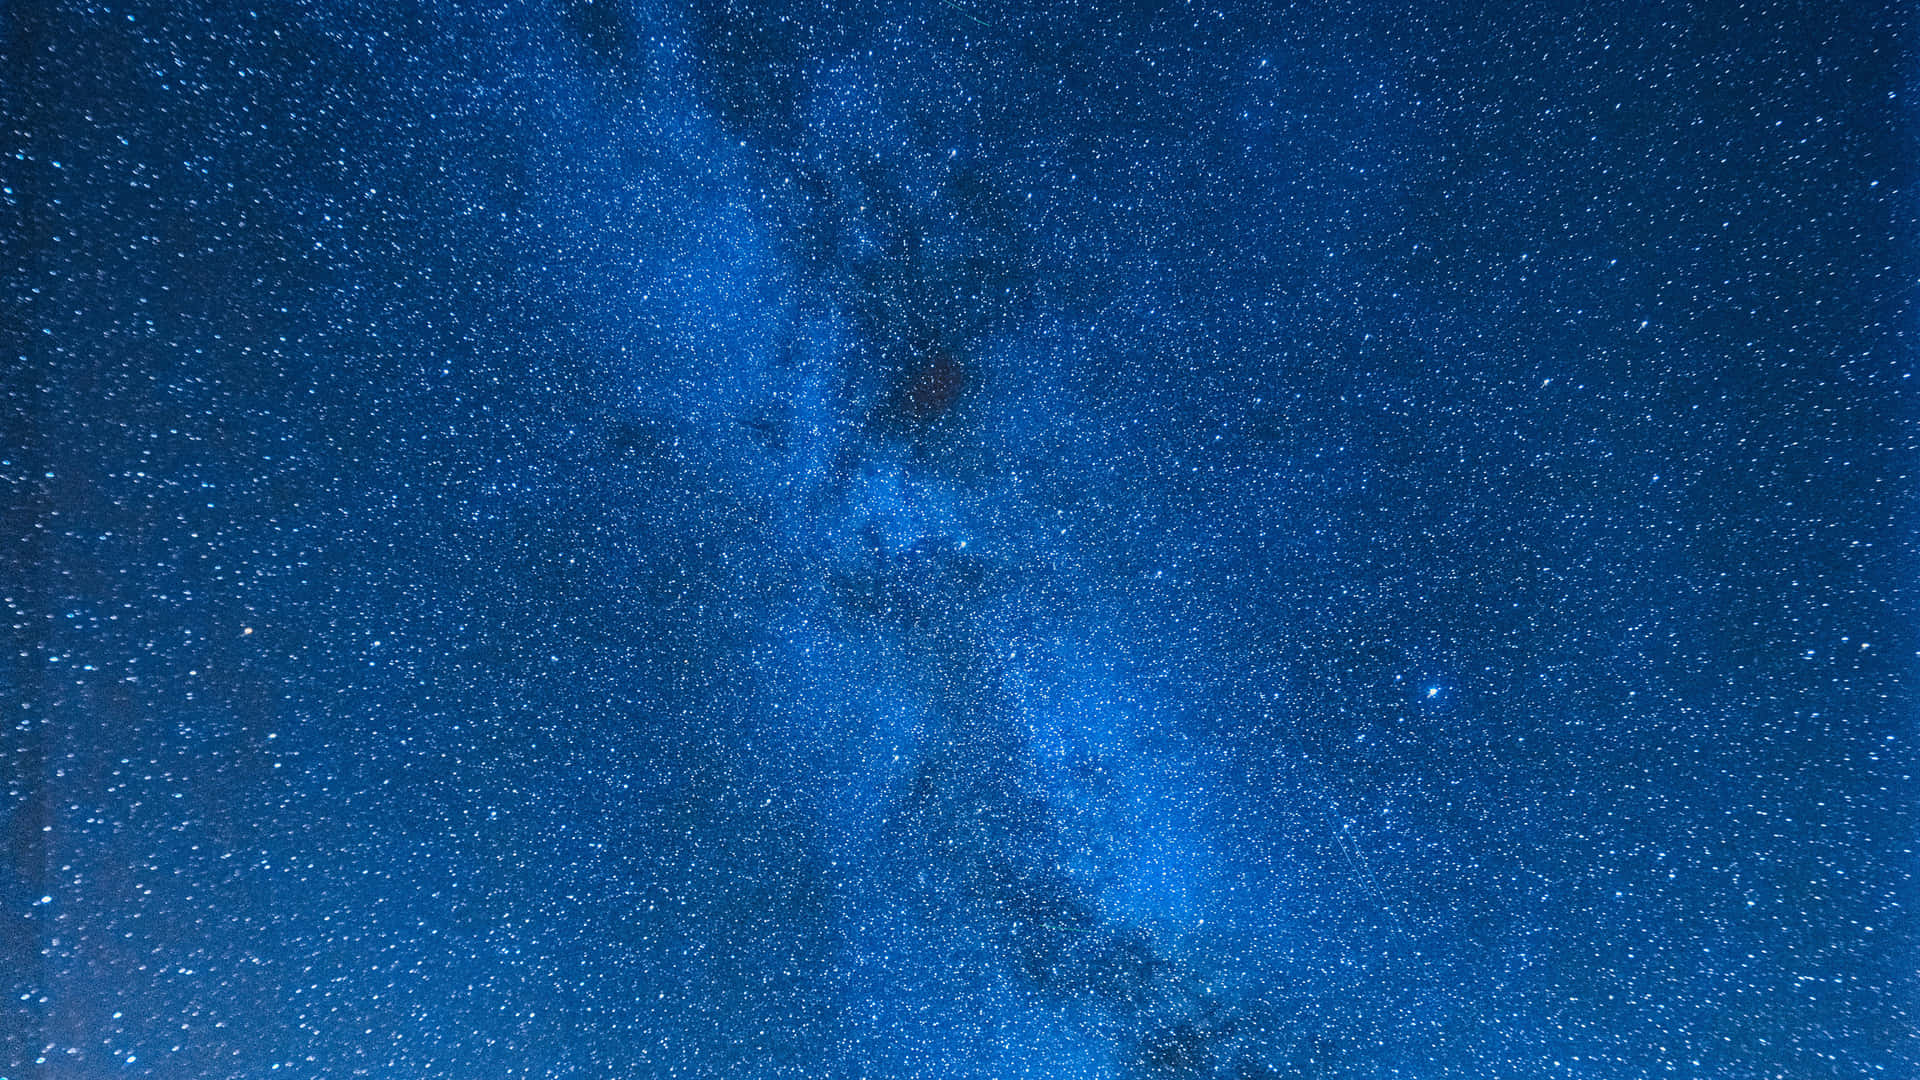 Look Up and Be Amazed at the Star Filled Sky Wallpaper